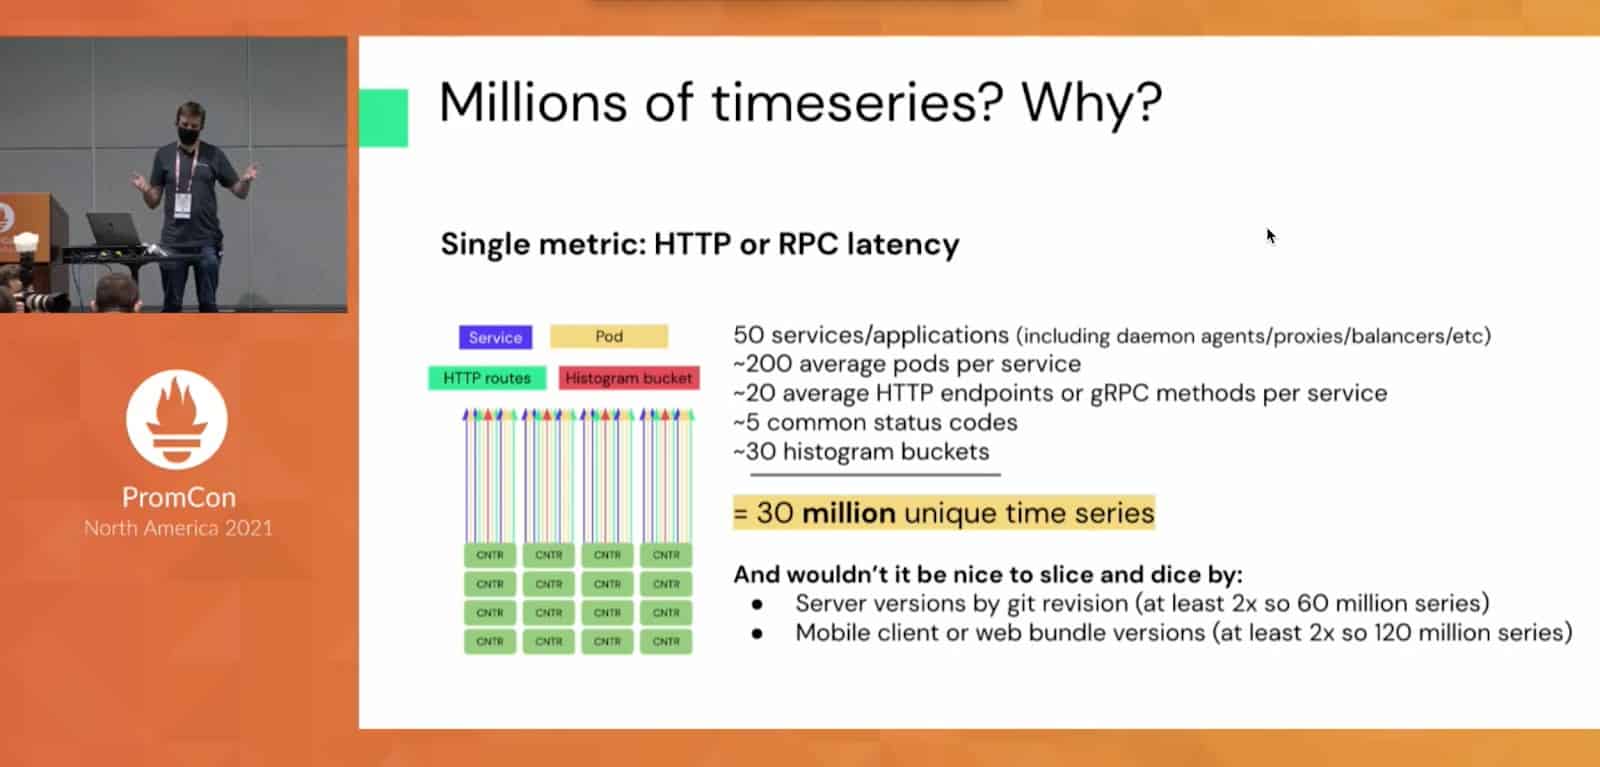 Screenshot showing PromCon North America 2021 Presentation "Millions of timeseries? Why?" presented by a Rob Skillington